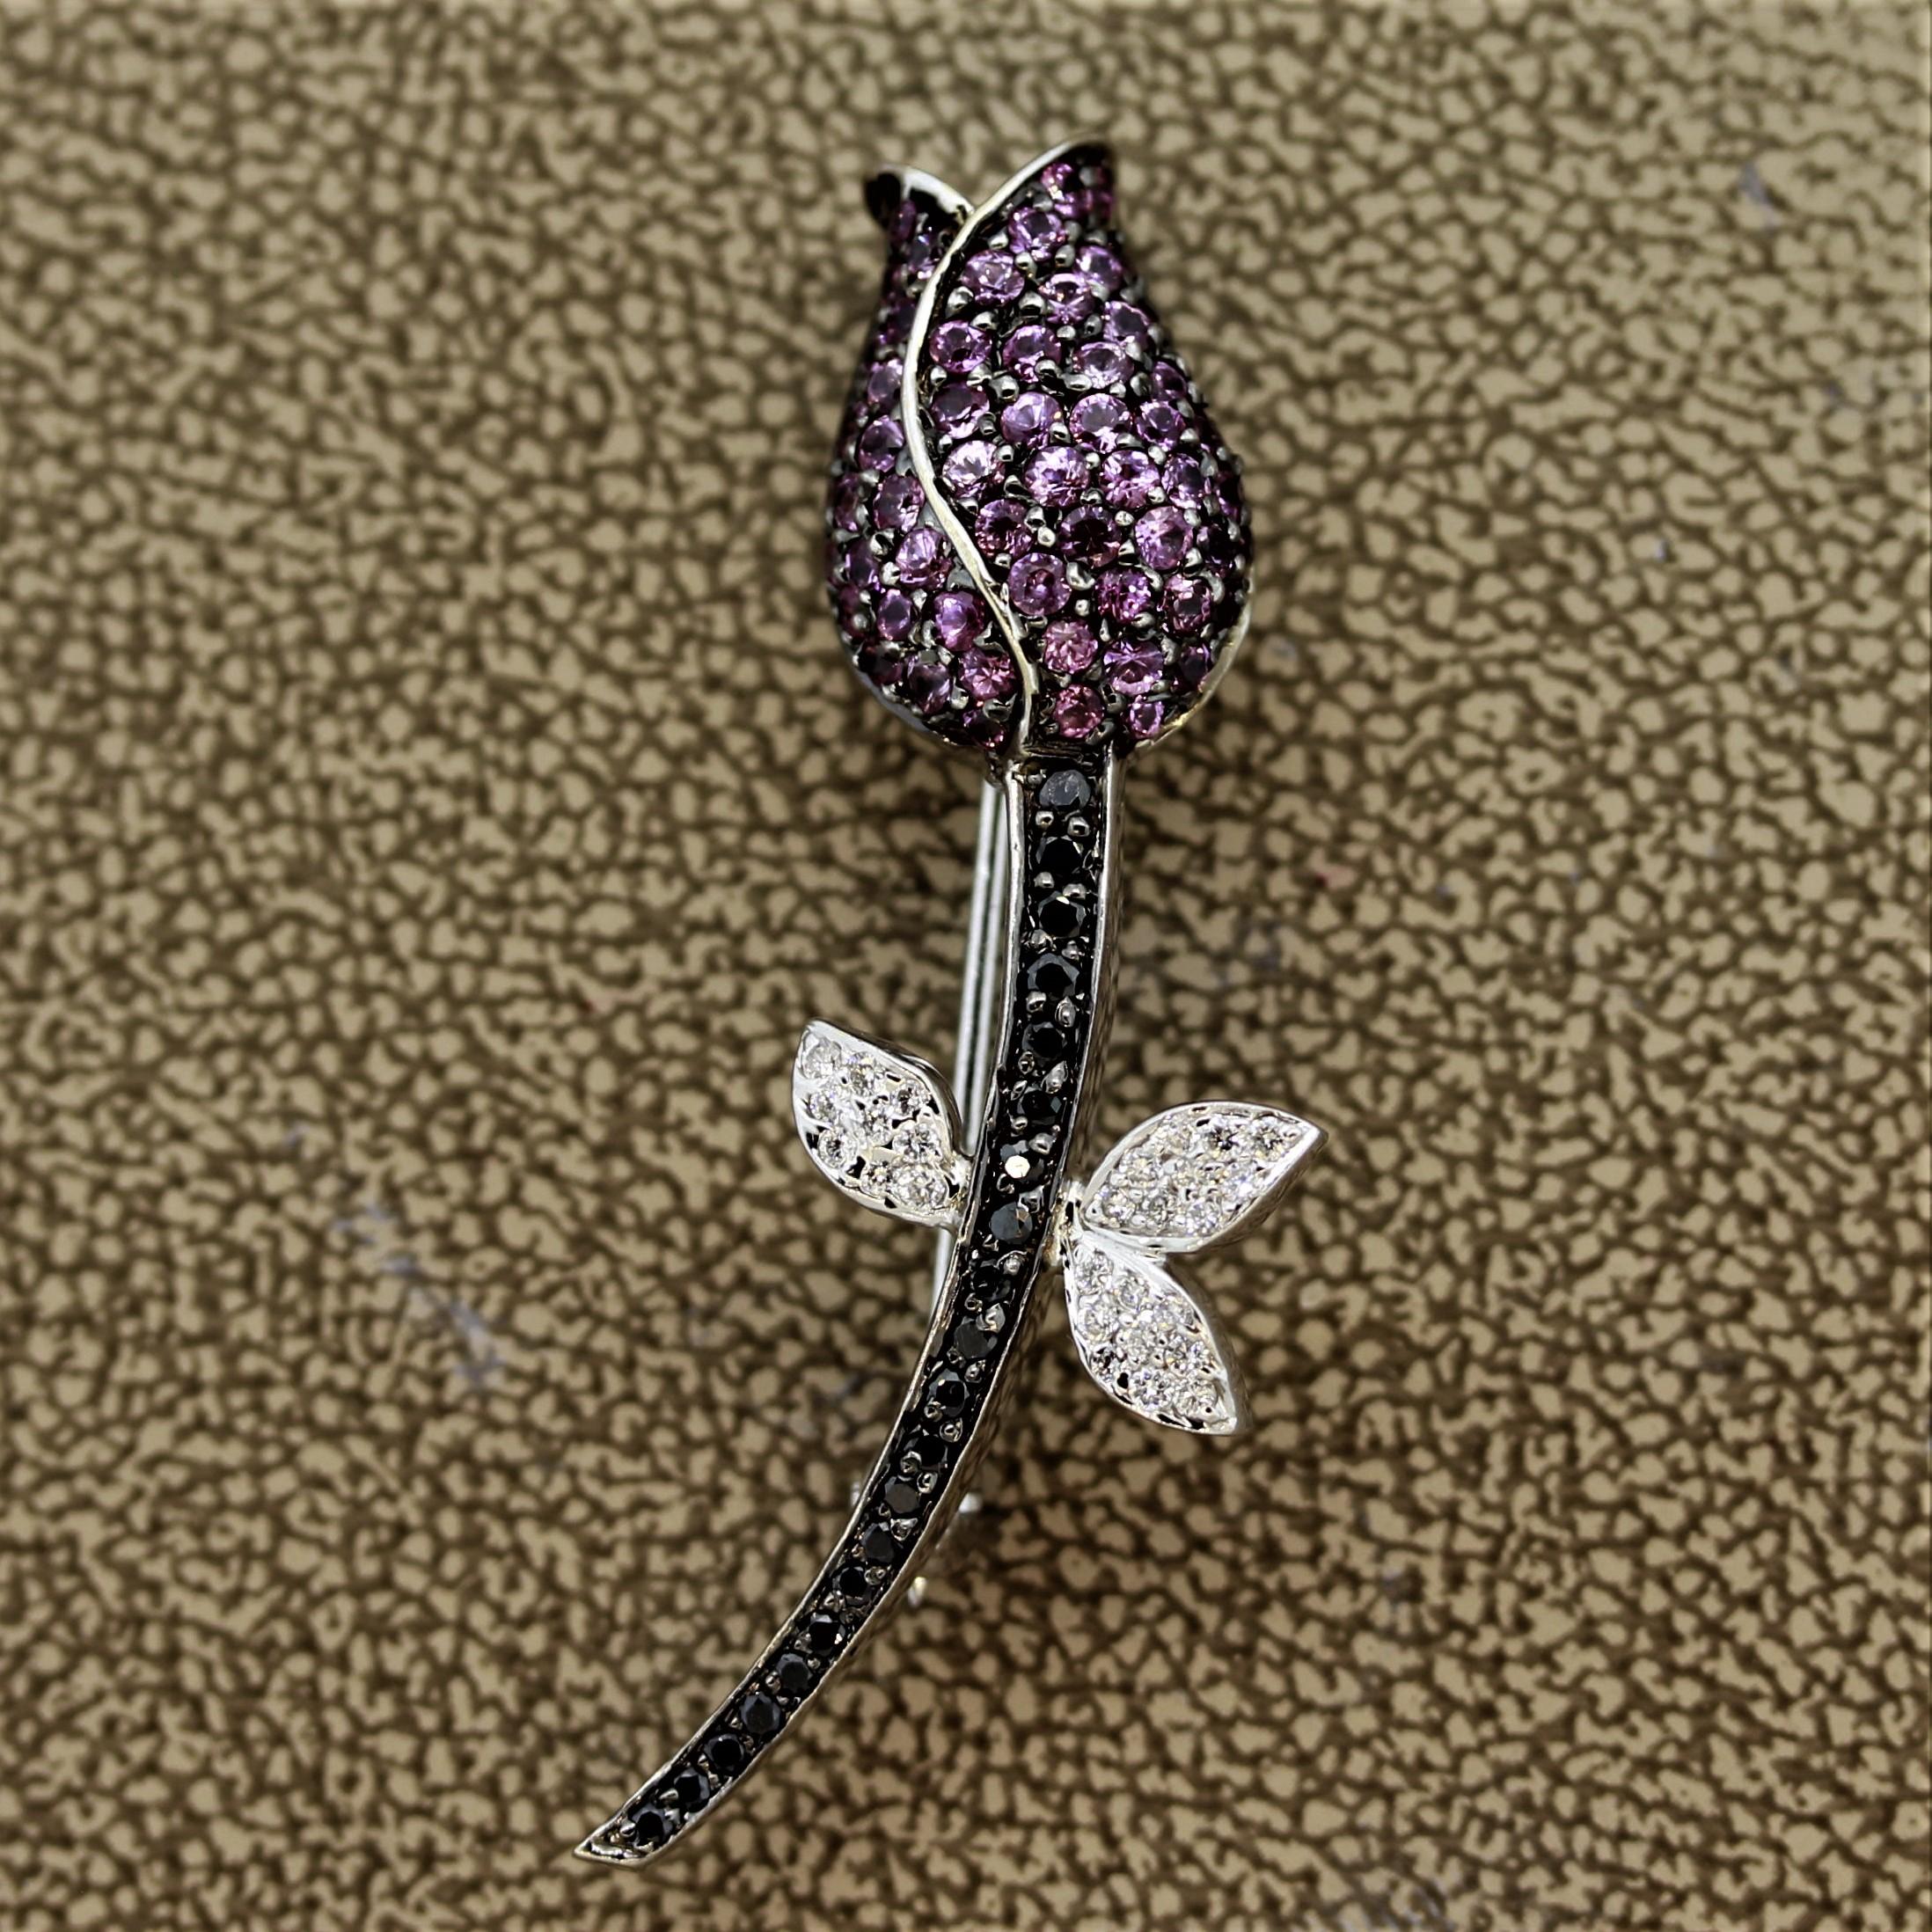 This sweet pin features 0.54 carats of pink sapphires along with 1.77 carats of black and white diamonds. Made in 18k white gold and a size that allows the piece to be worn casually with multiple outfits.

Length: 1.2 inches